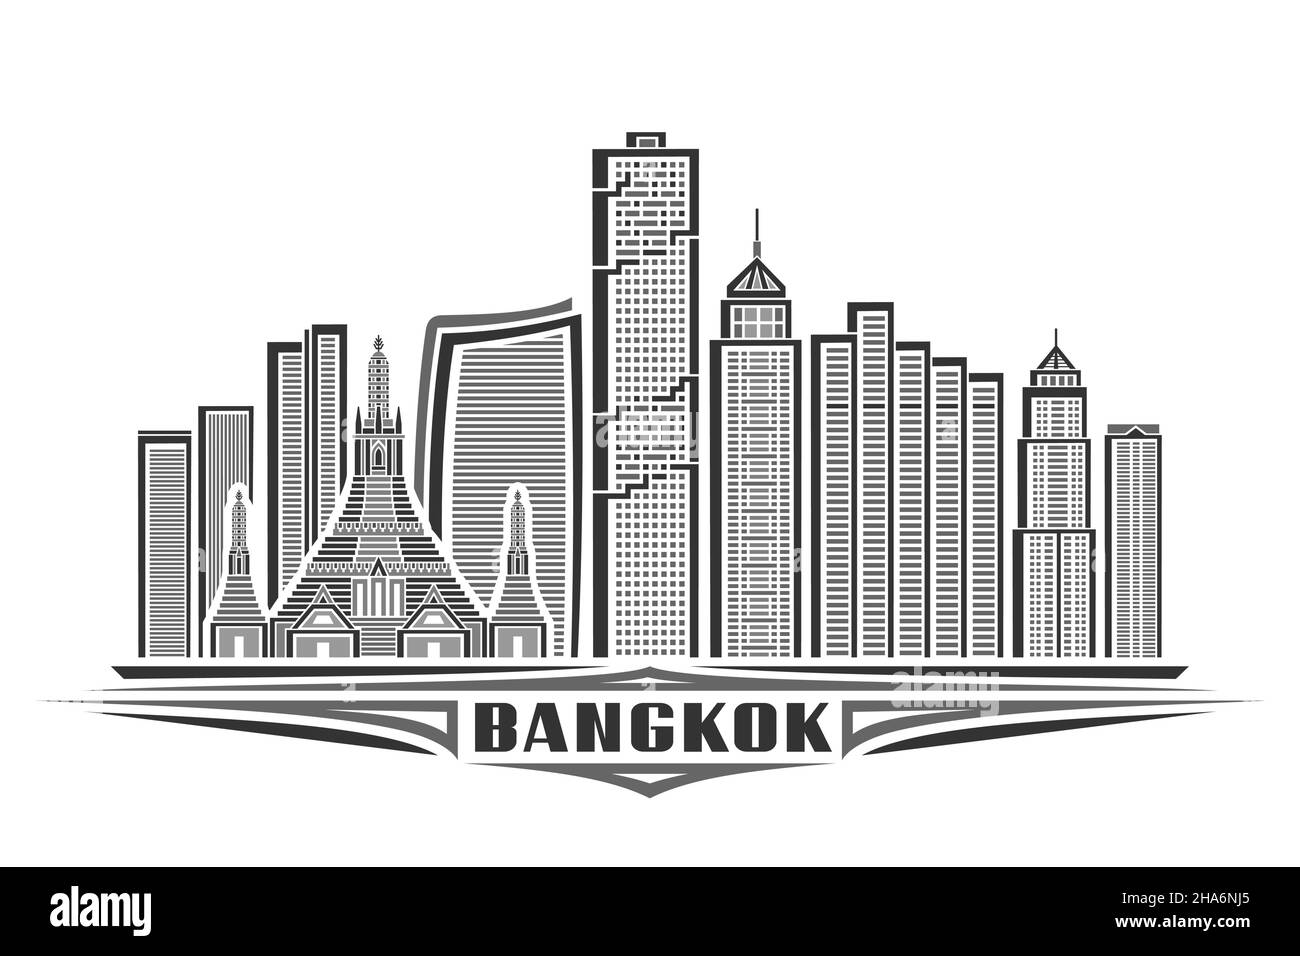 Vector illustration of Bangkok, monochrome horizontal poster with linear design famous bangkok city scape, urban line art concept with decorative lett Stock Vector